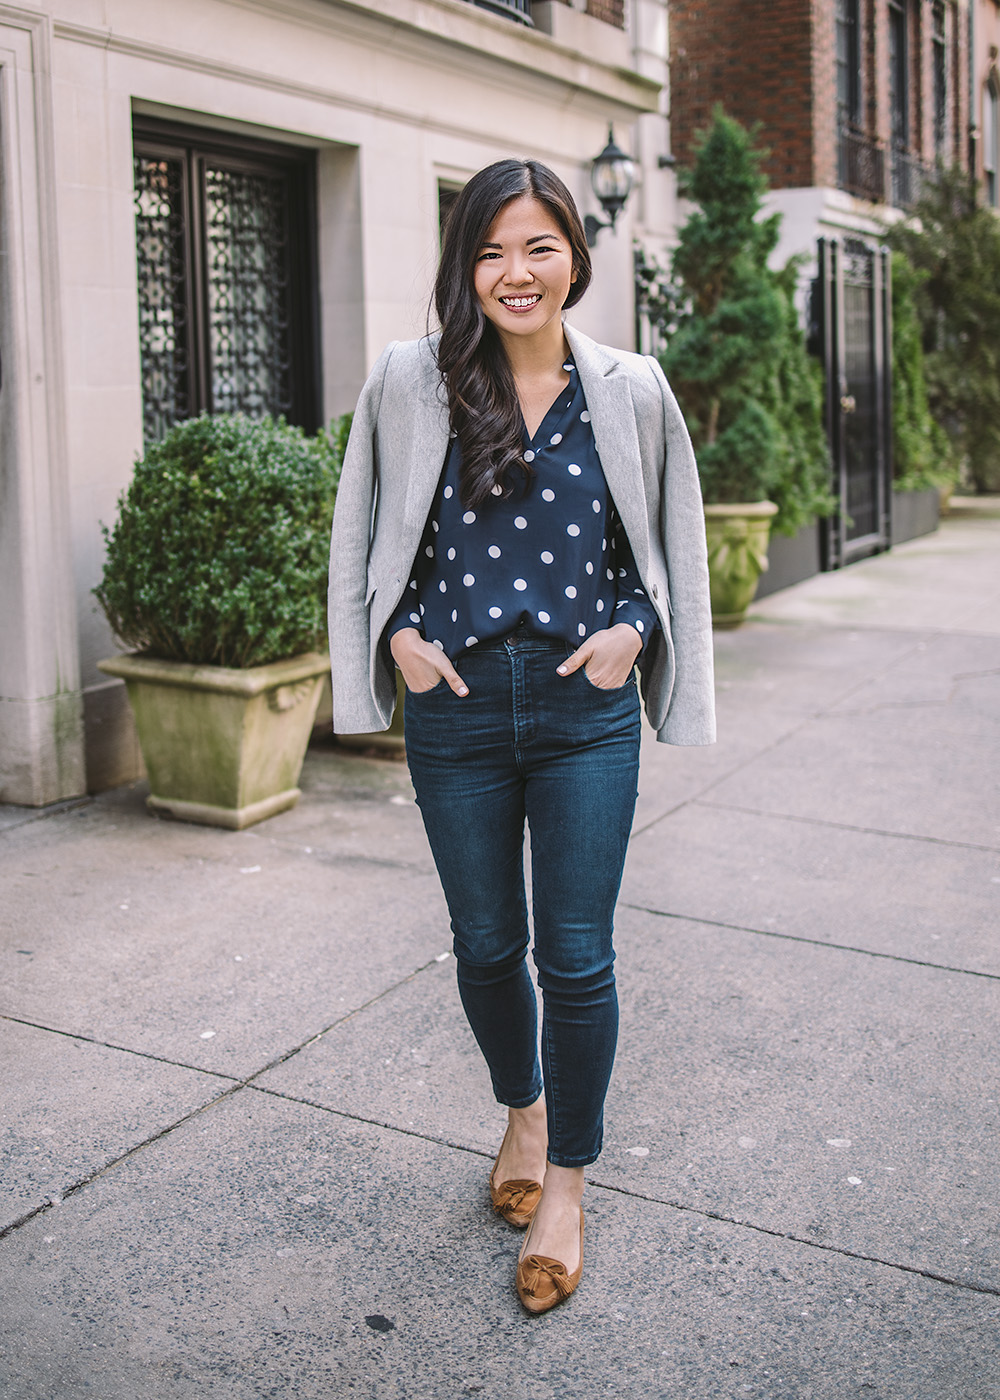 Business Casual Work Outfit Idea / Grey Blazer & Polka Dot Blouse